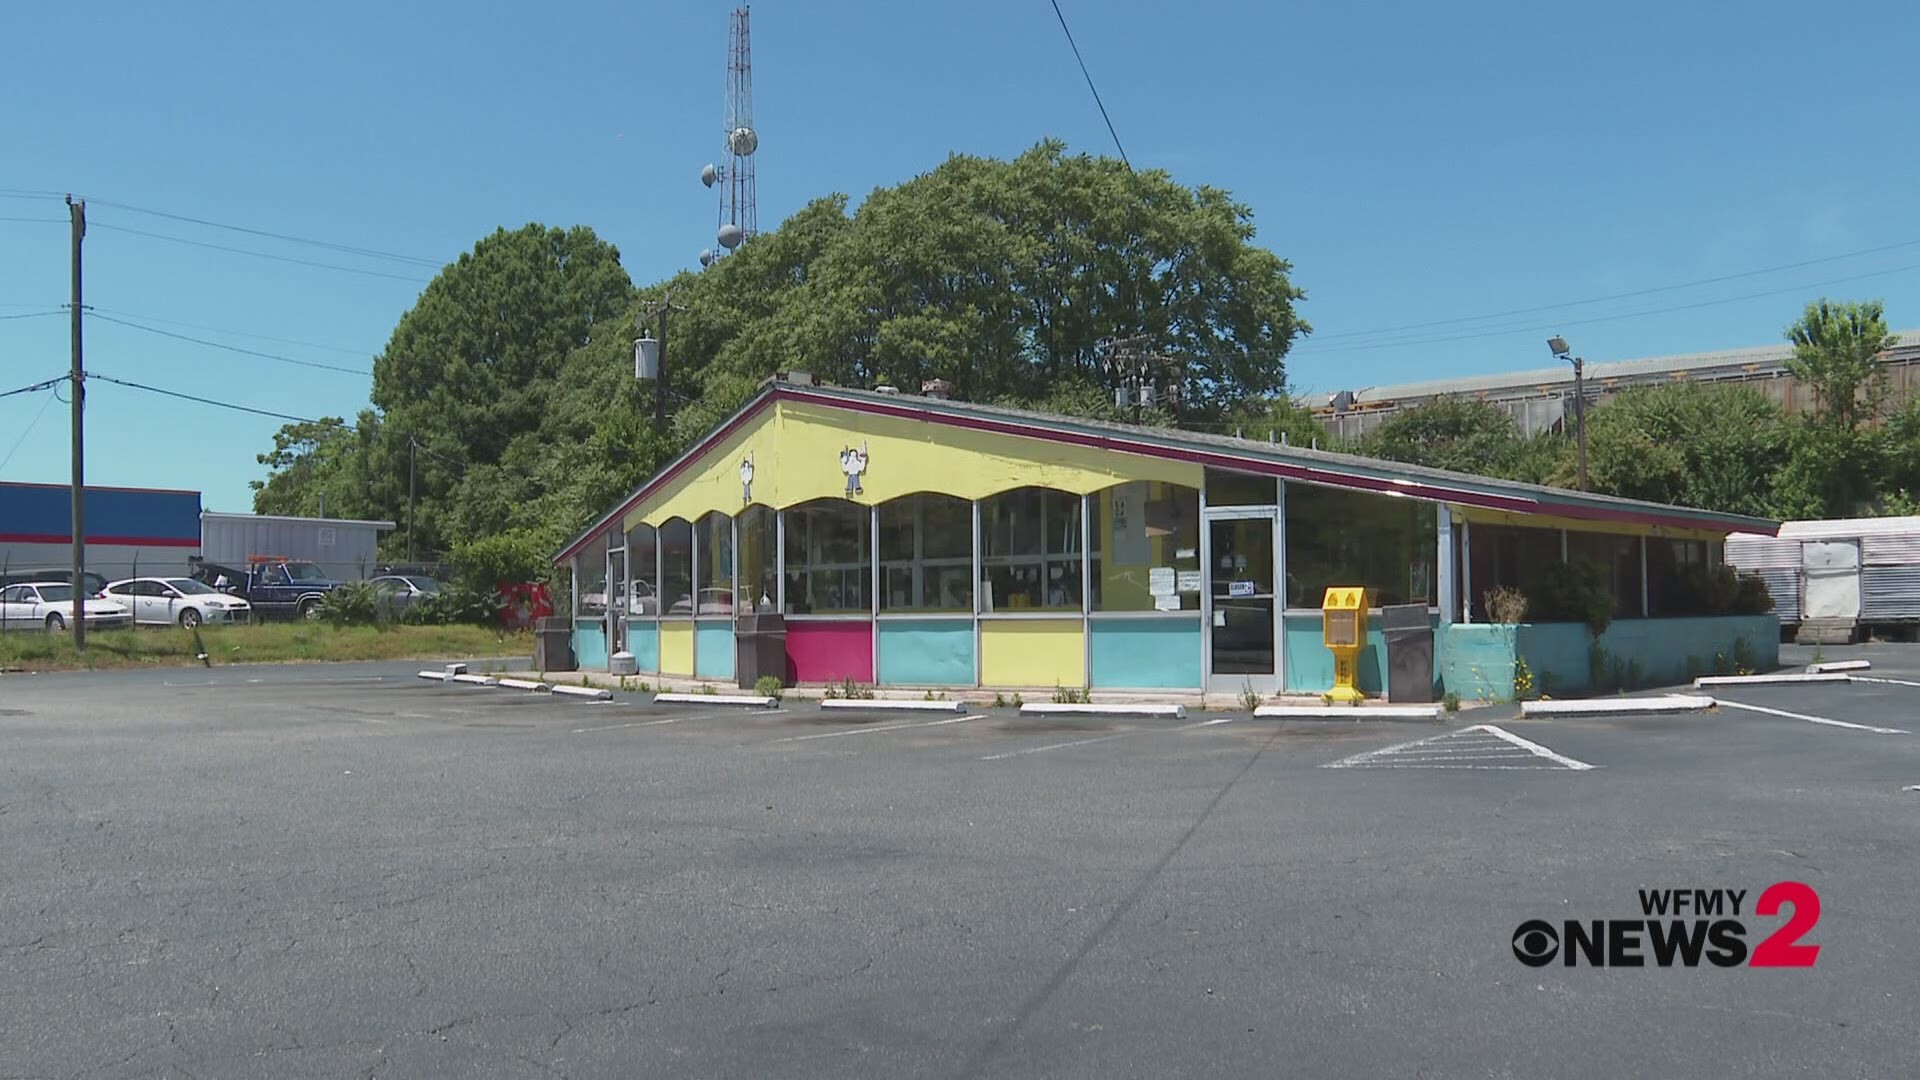 He grew up with Ralph Havis, Beef Burger's long-time owner. Havis died in July. Now the man wants to honor Havis' memory by reviving the restaurant.